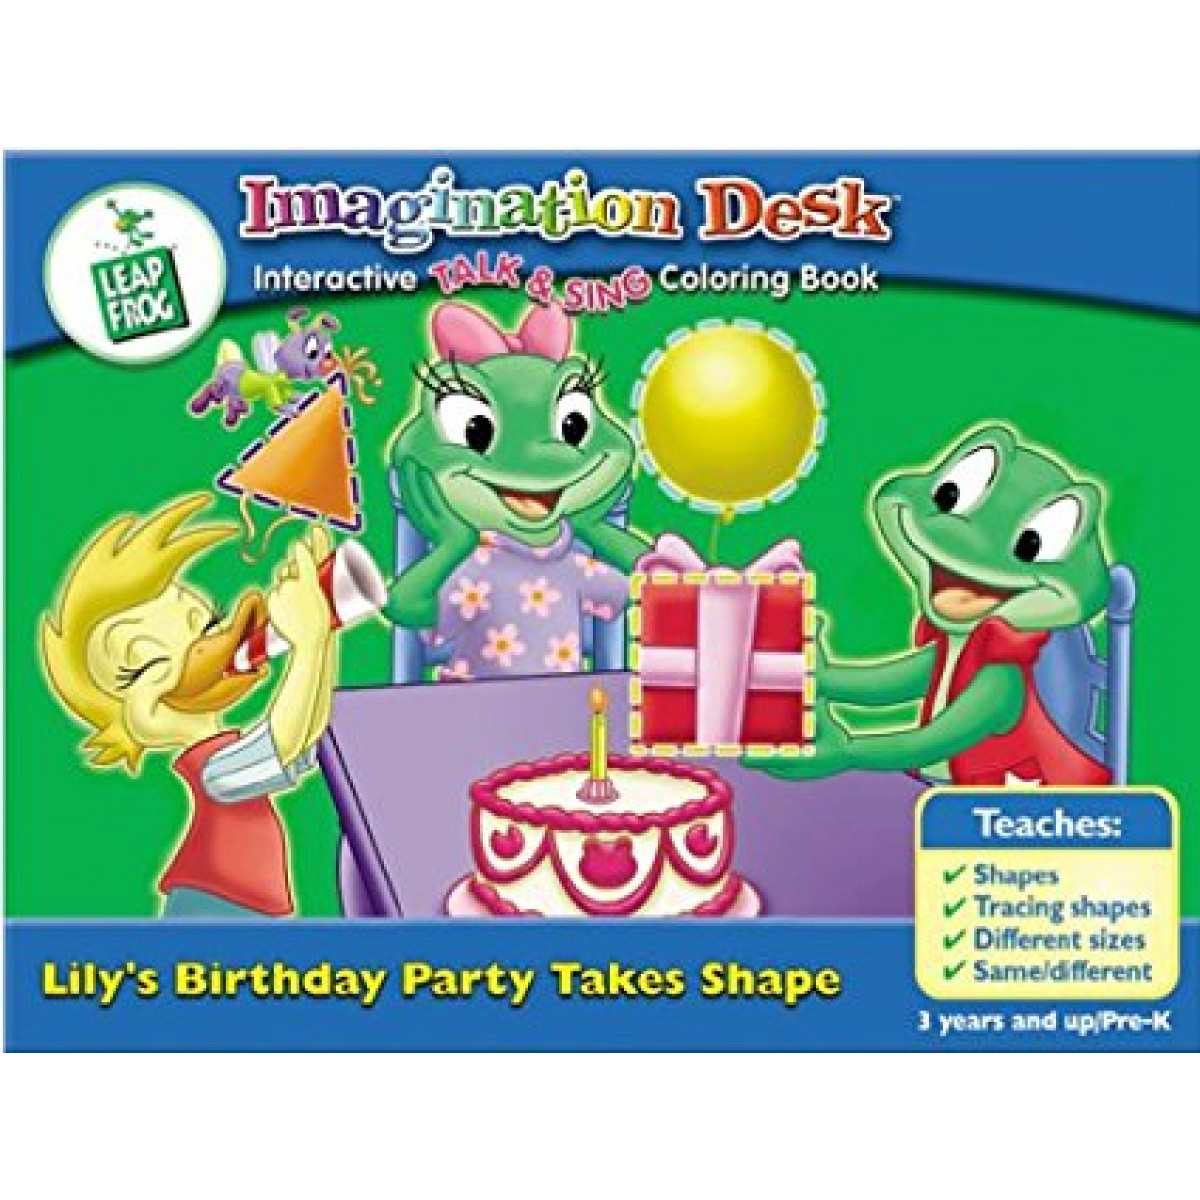 Leapfrog Imagination Desk Coloring Pages Leapfrog Enterprises Leapfrog Imagination Desk Lilys Birthday Party Takes Shape